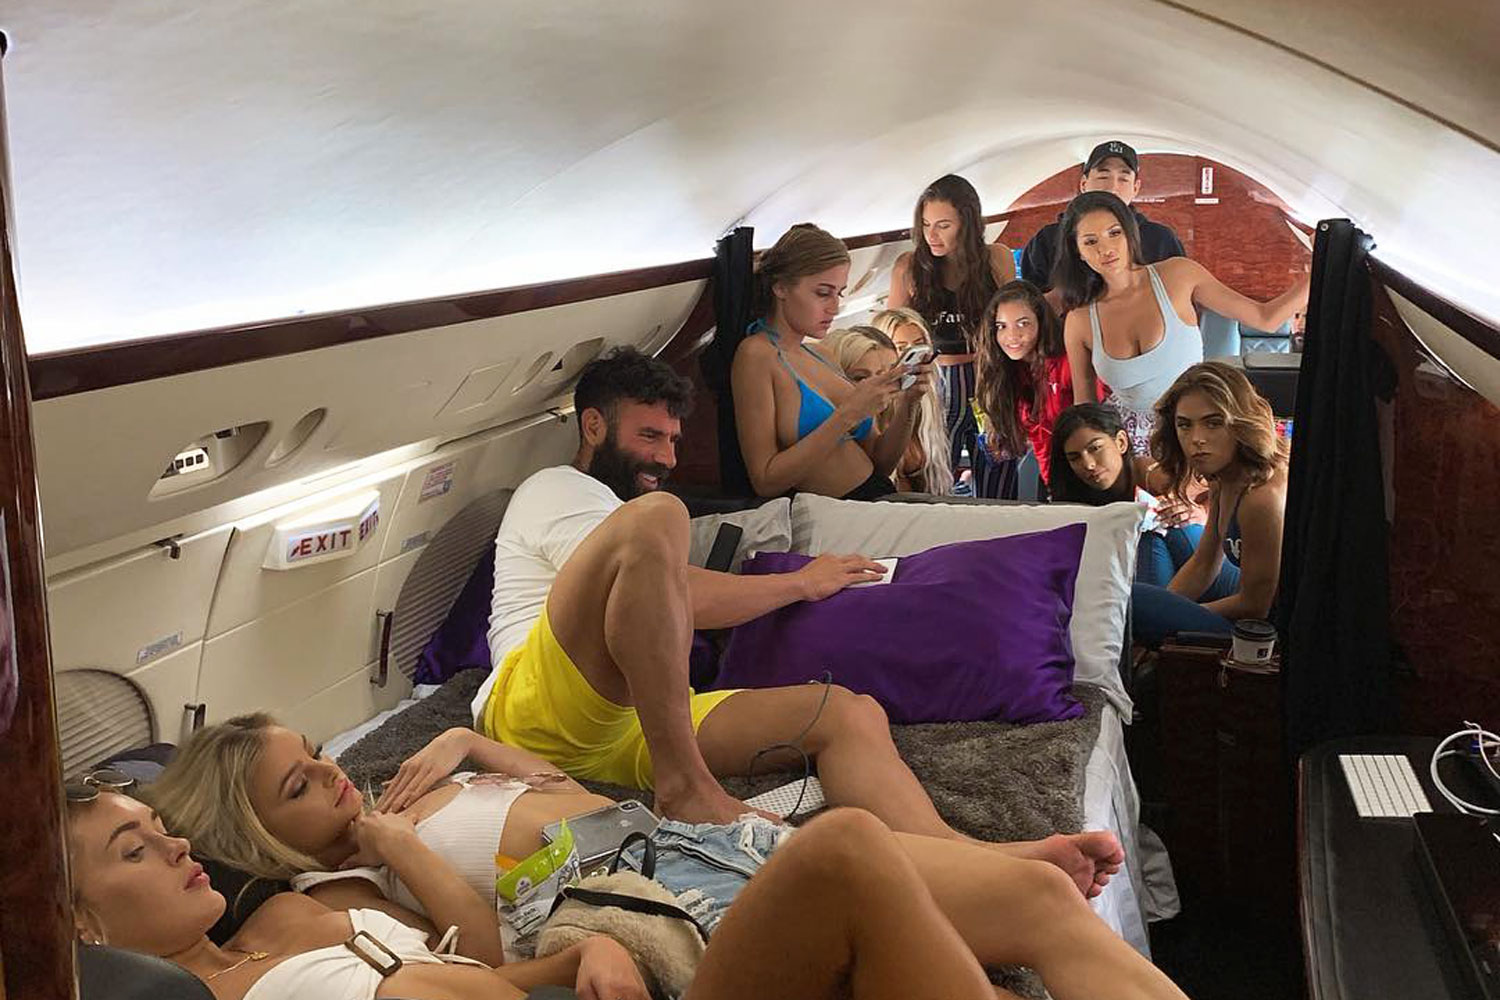 Vegas ‘Mile High Club’ Airline Slammed As ‘Unethical’